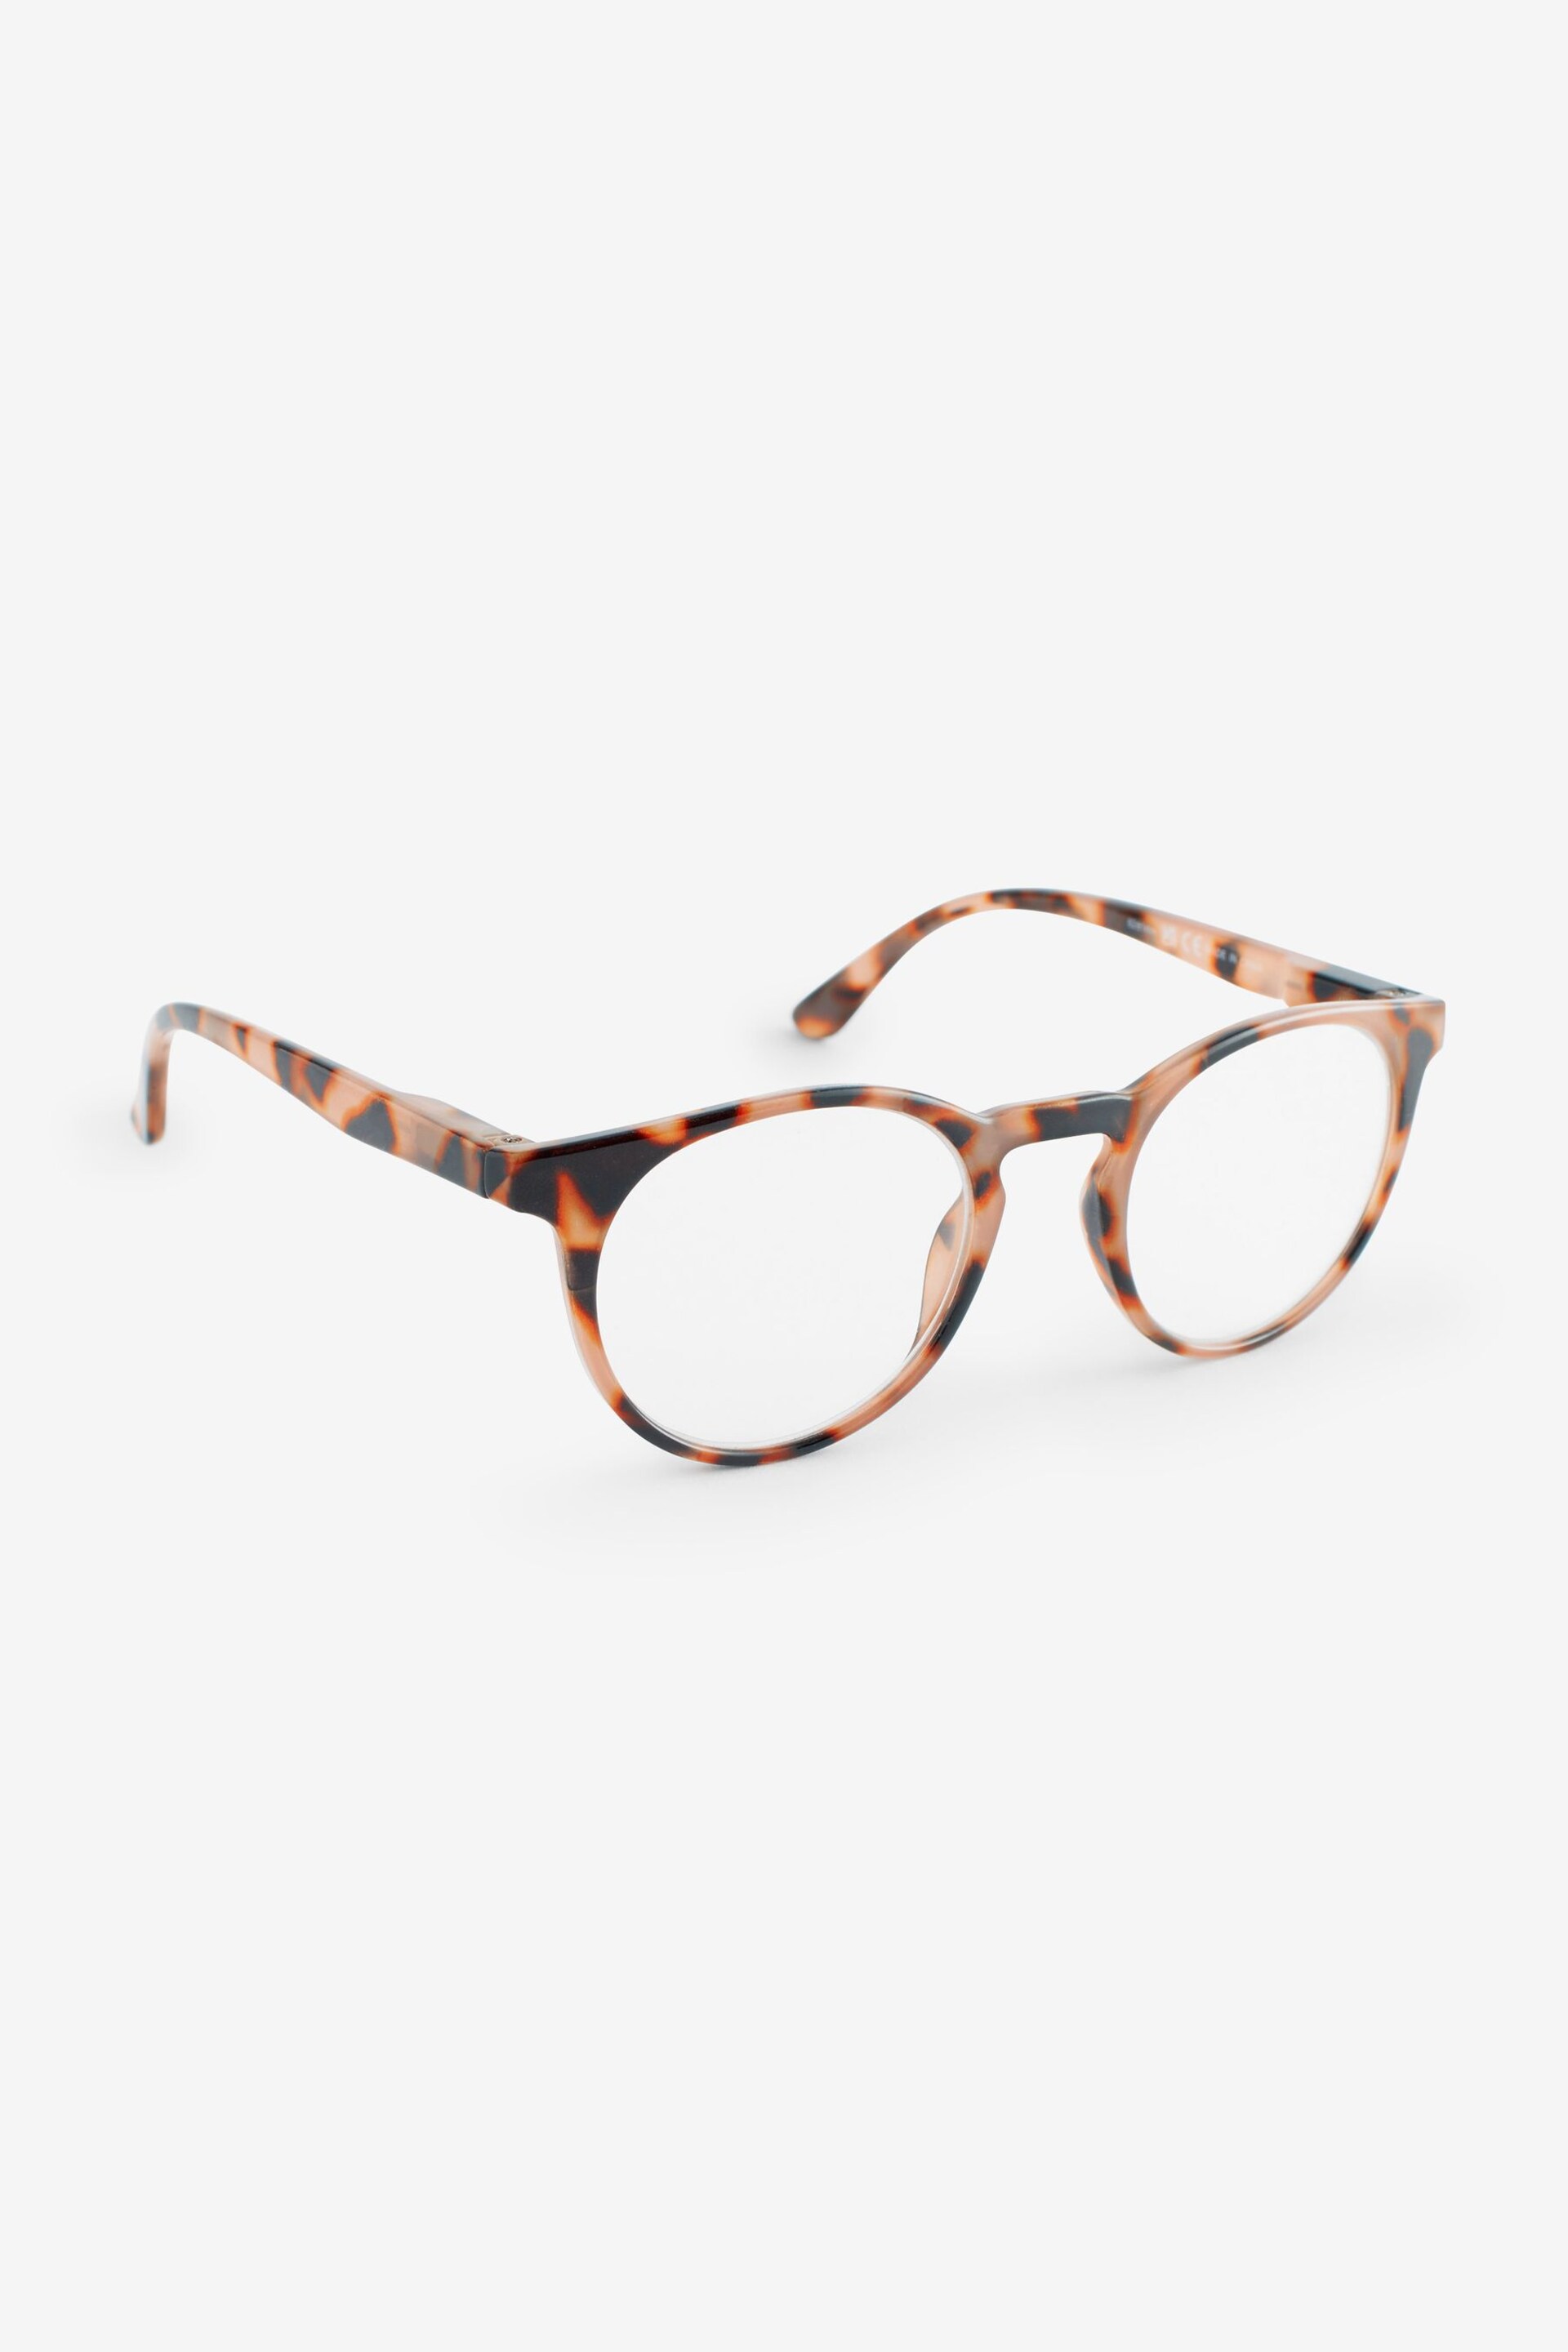 Tortoiseshell Brown Round Ready to Read Glasses - Image 1 of 6